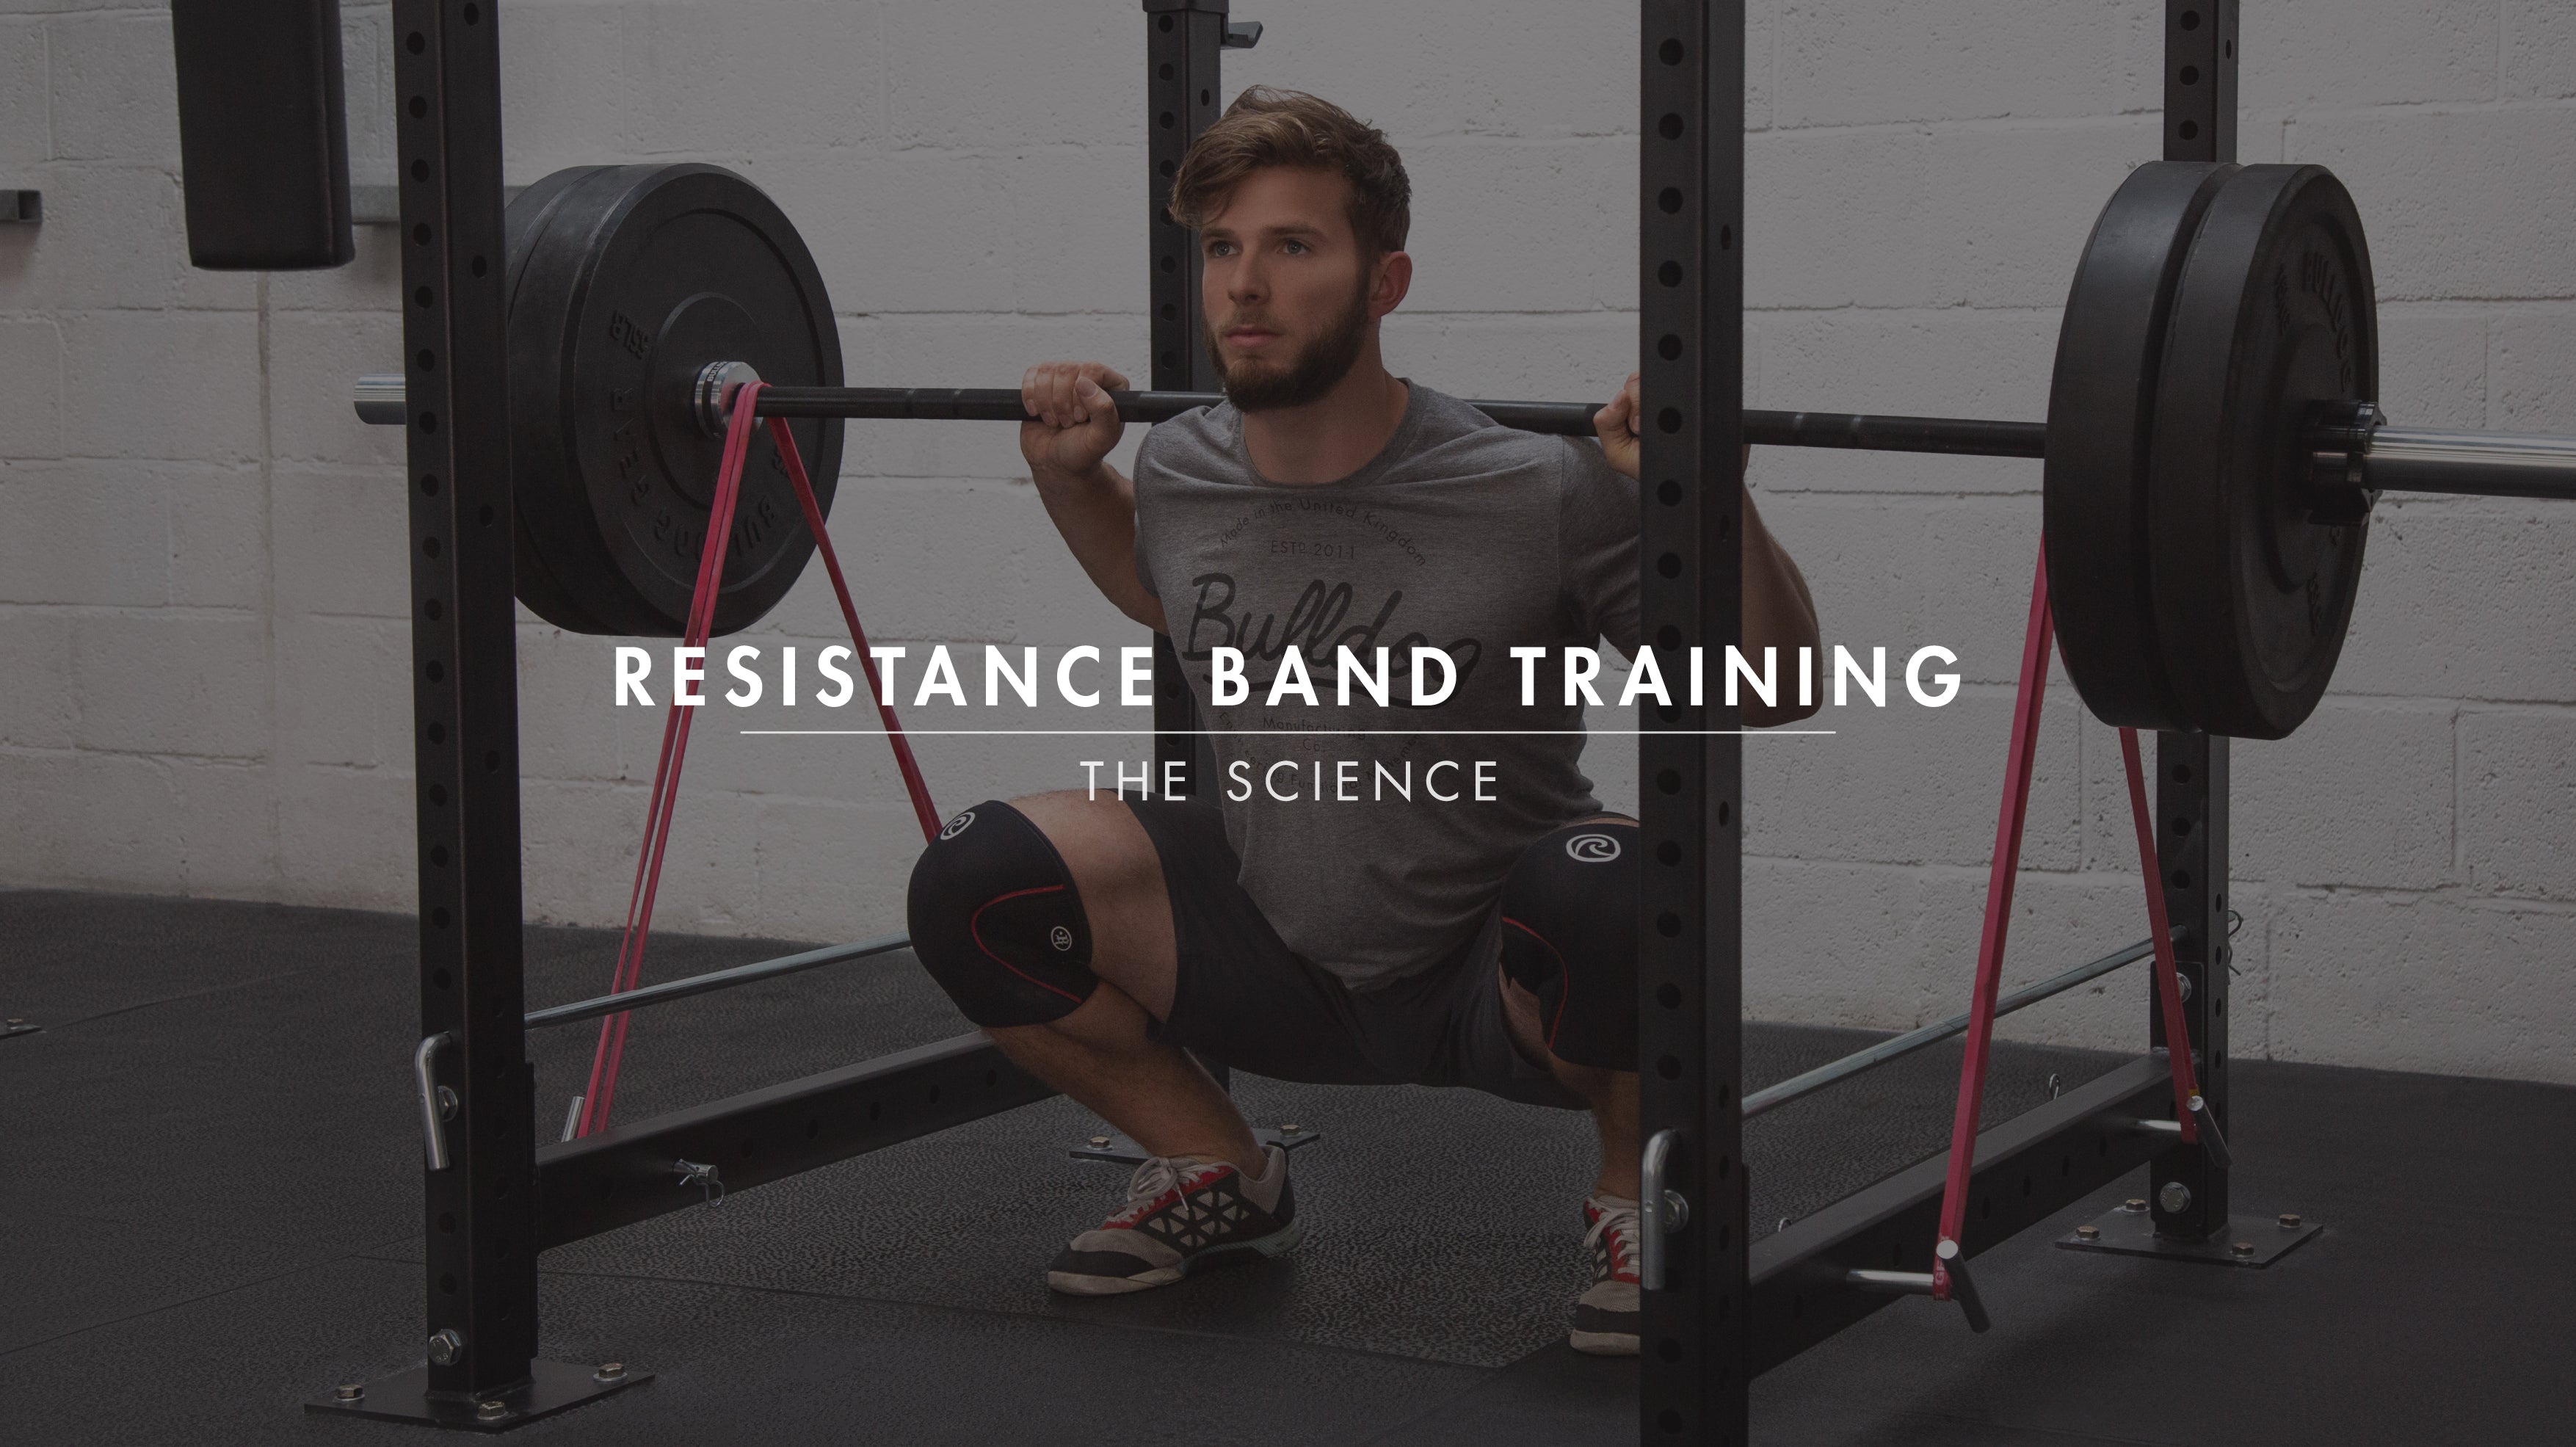 Resistance Bands, are they an effective training aid?